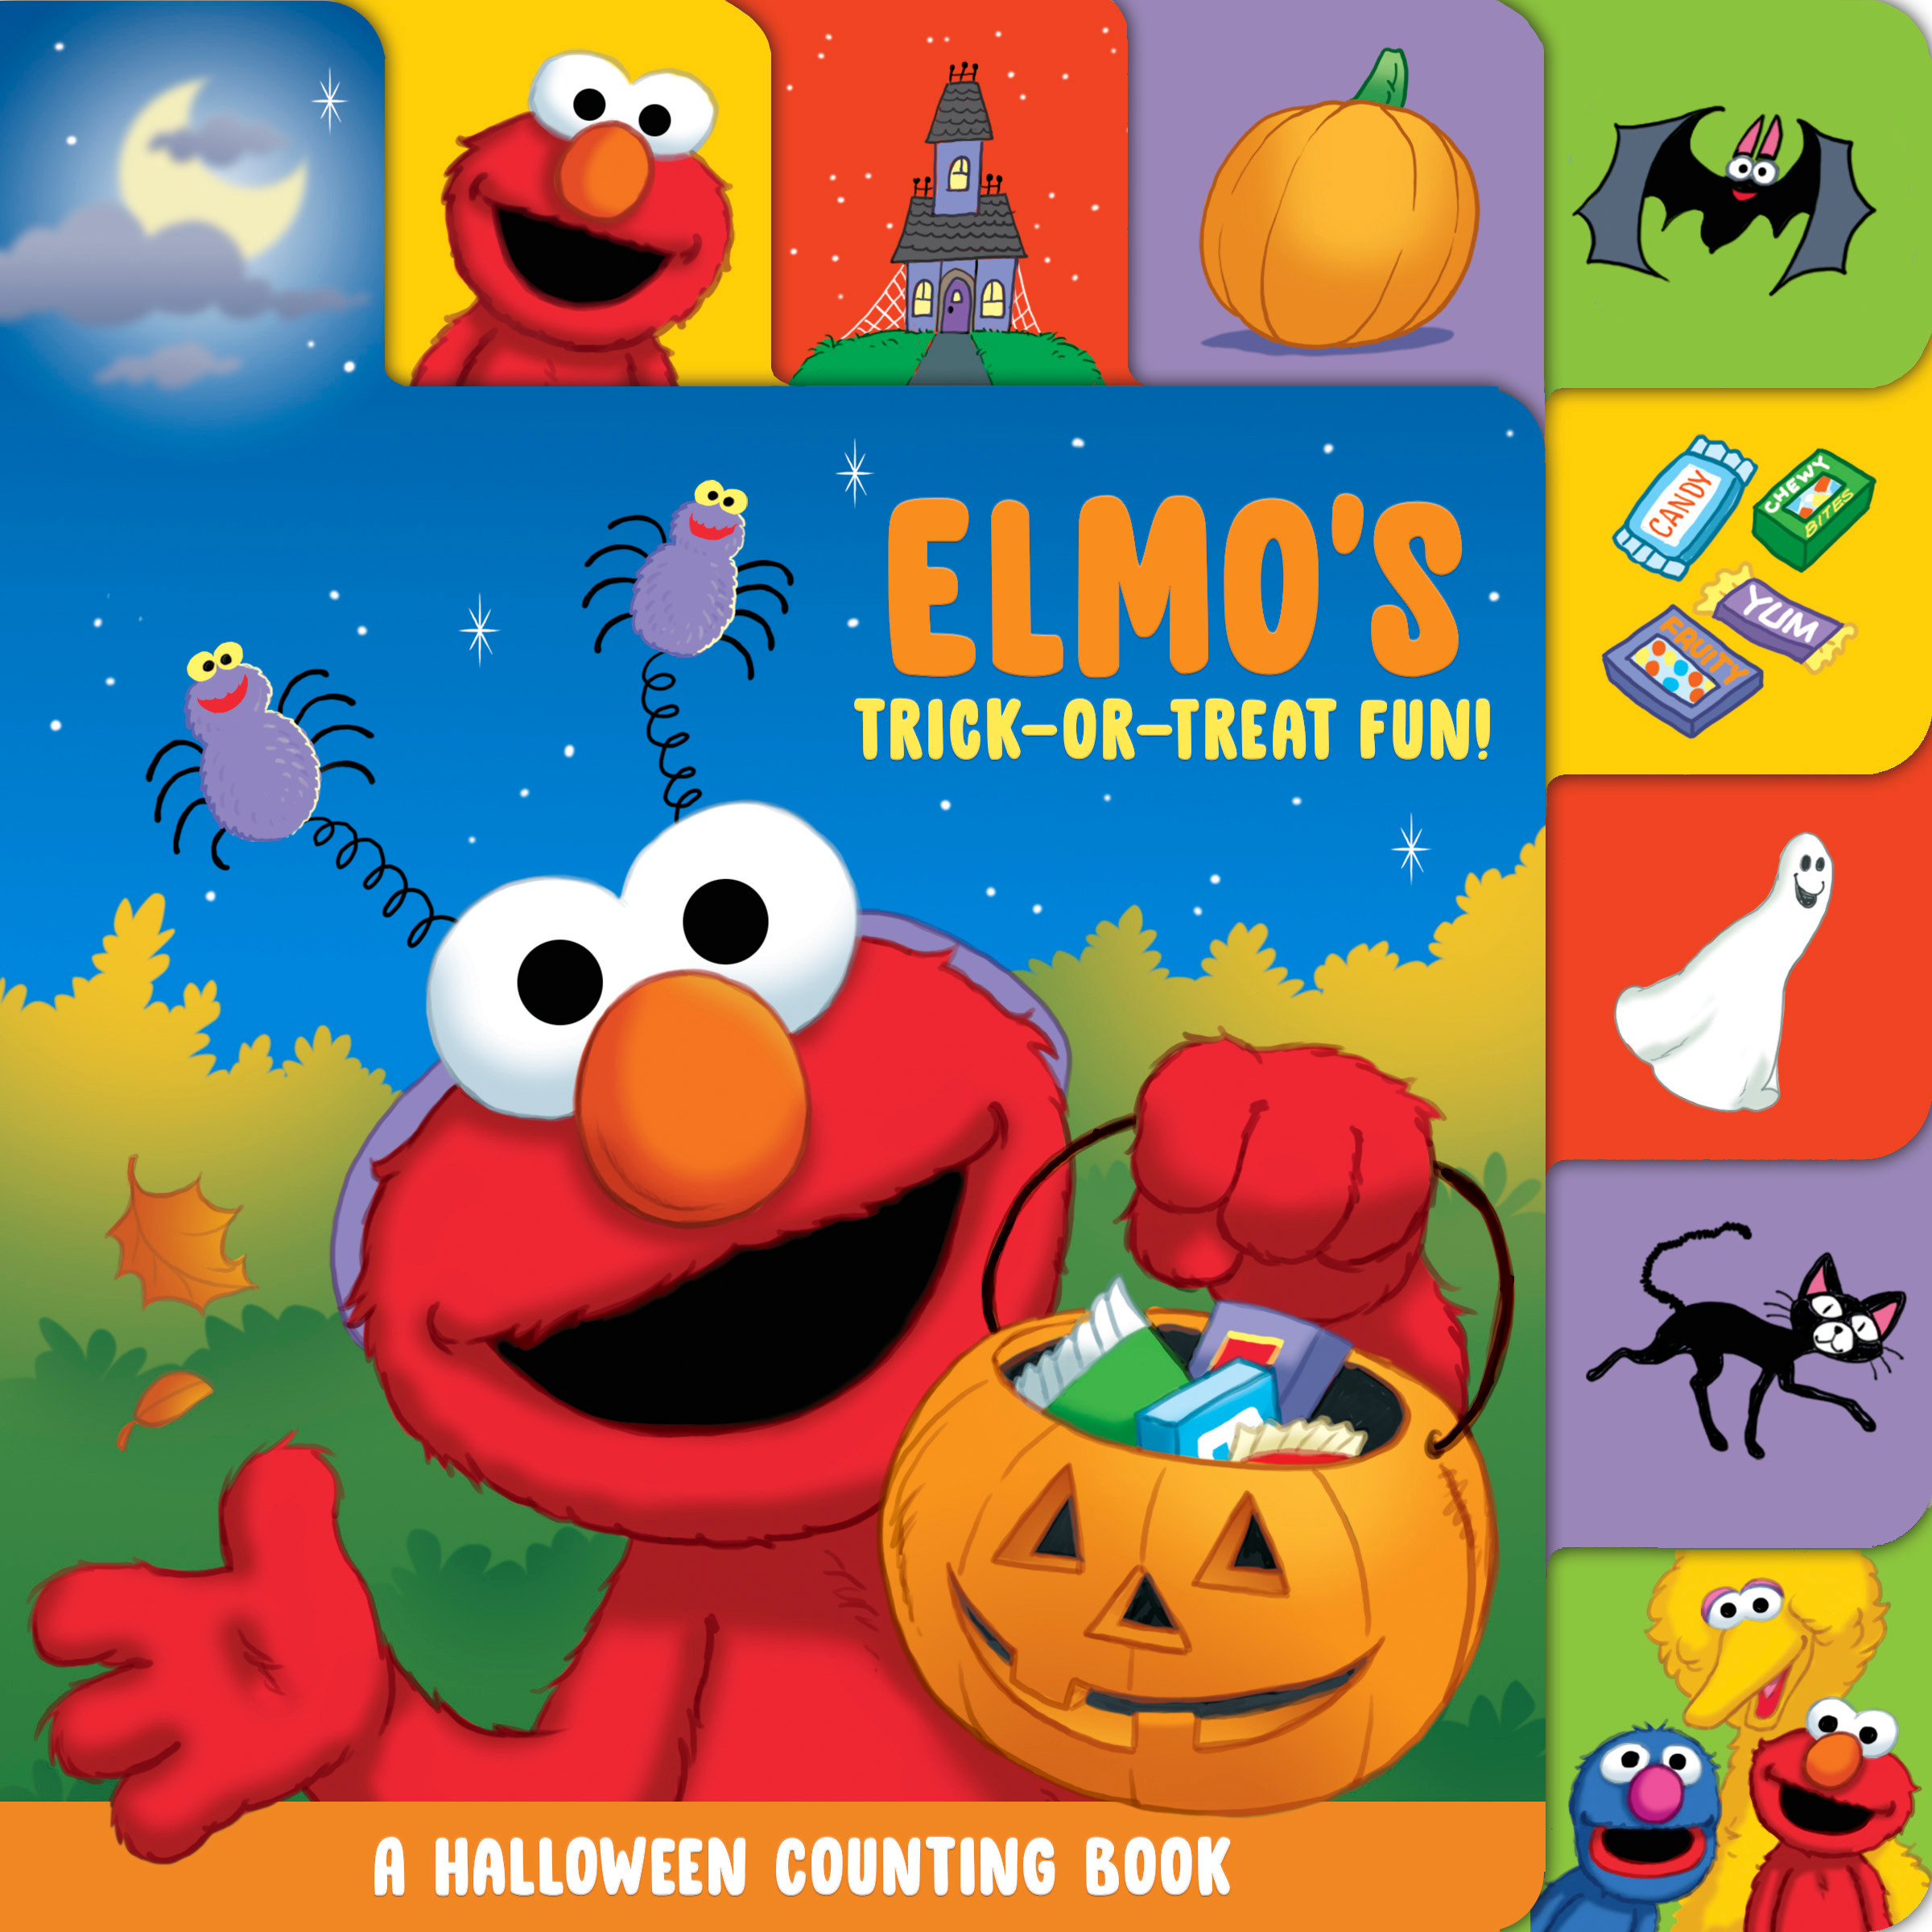 Elmo's Trick-or-Treat Fun!: A Halloween Counting Book (Sesame Street) | Posner-Sanchez, Andrea